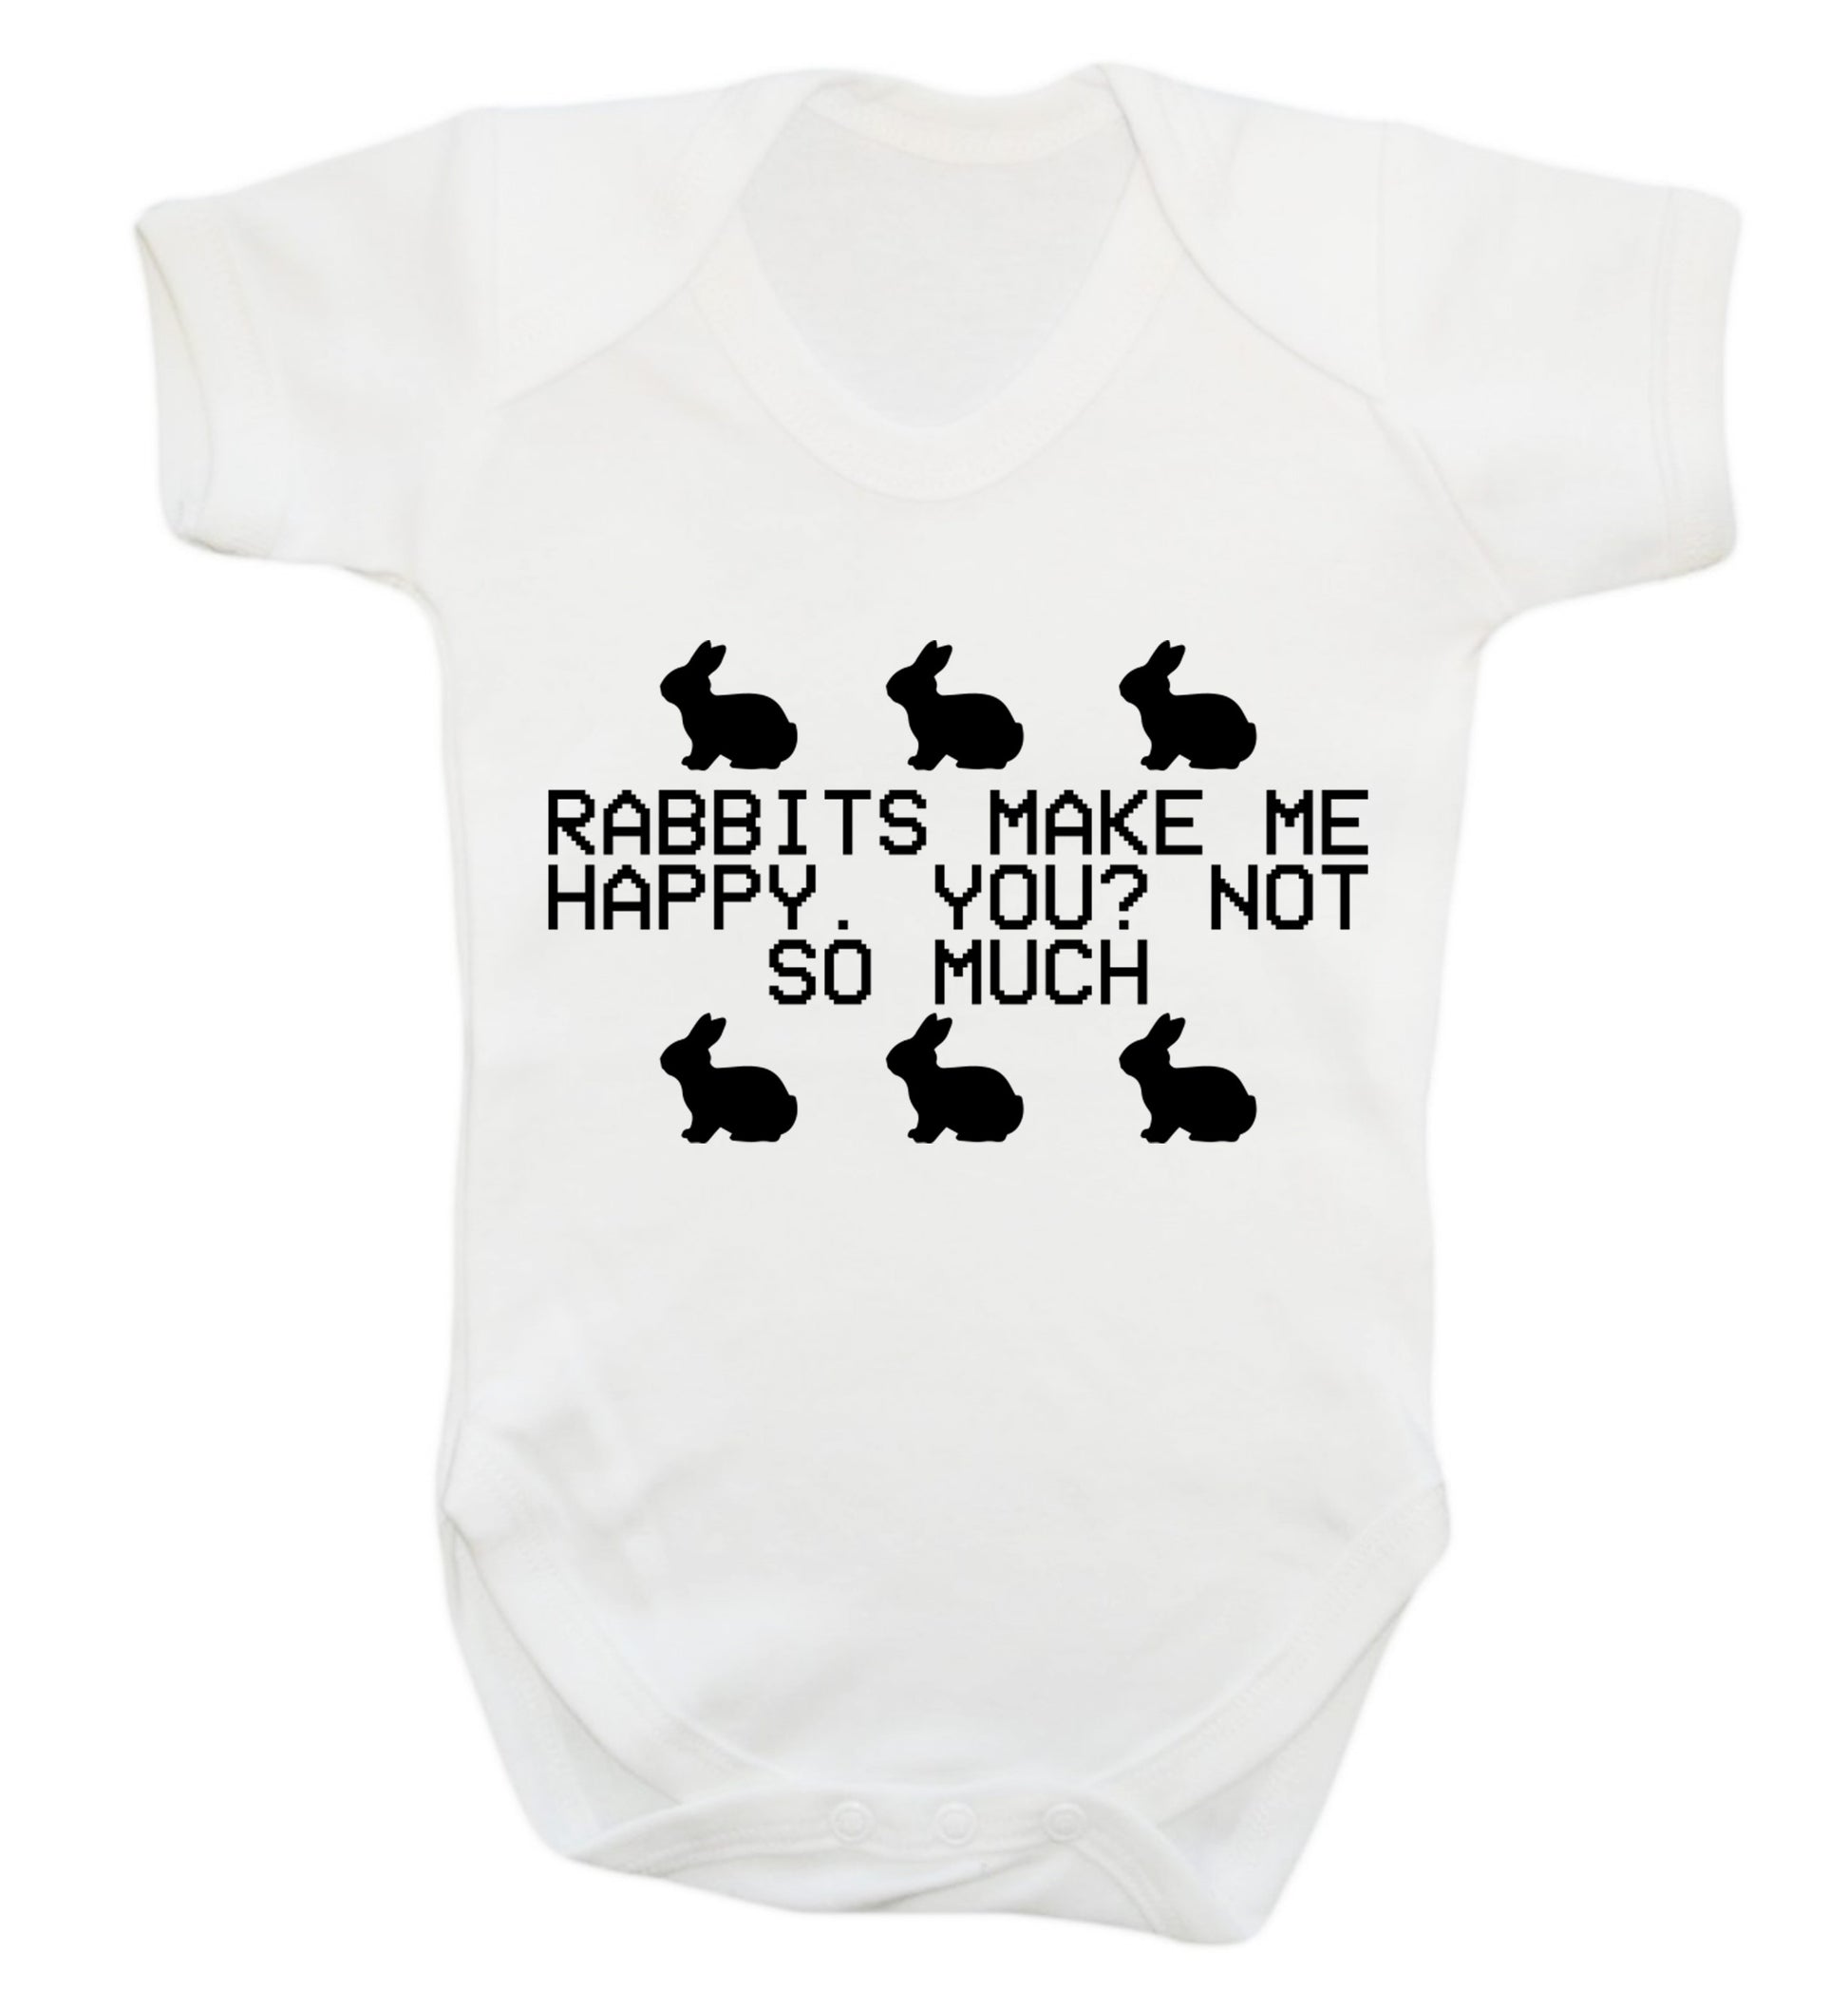 Rabbits make me happy, you not so much Baby Vest white 18-24 months